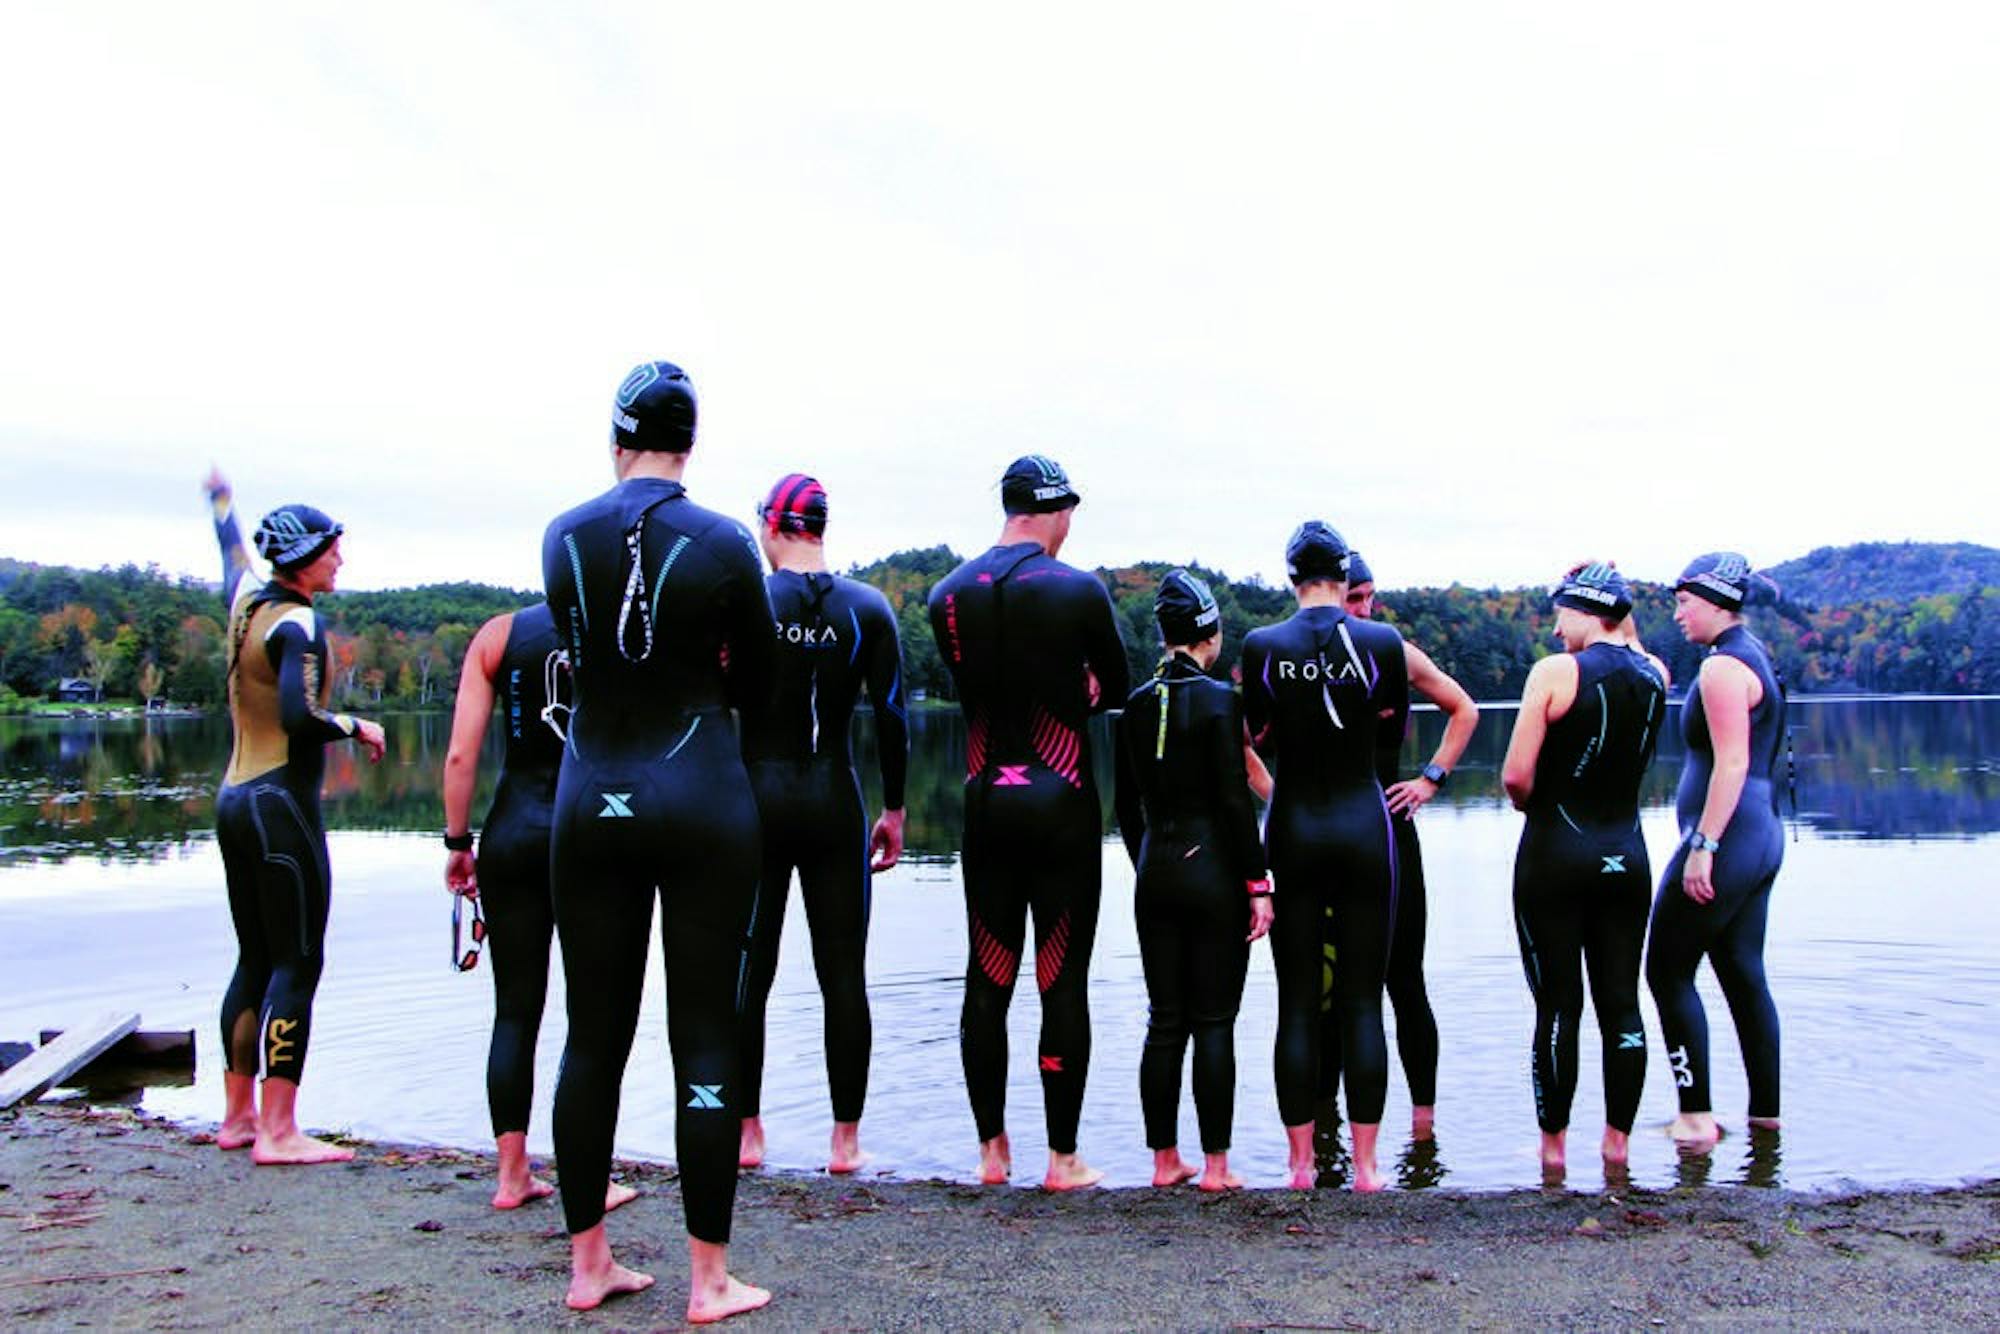 The Triathlon team swims, bikes and runs in a variety of different events. Many athletes train six days a week, though practices are held seven days a week.